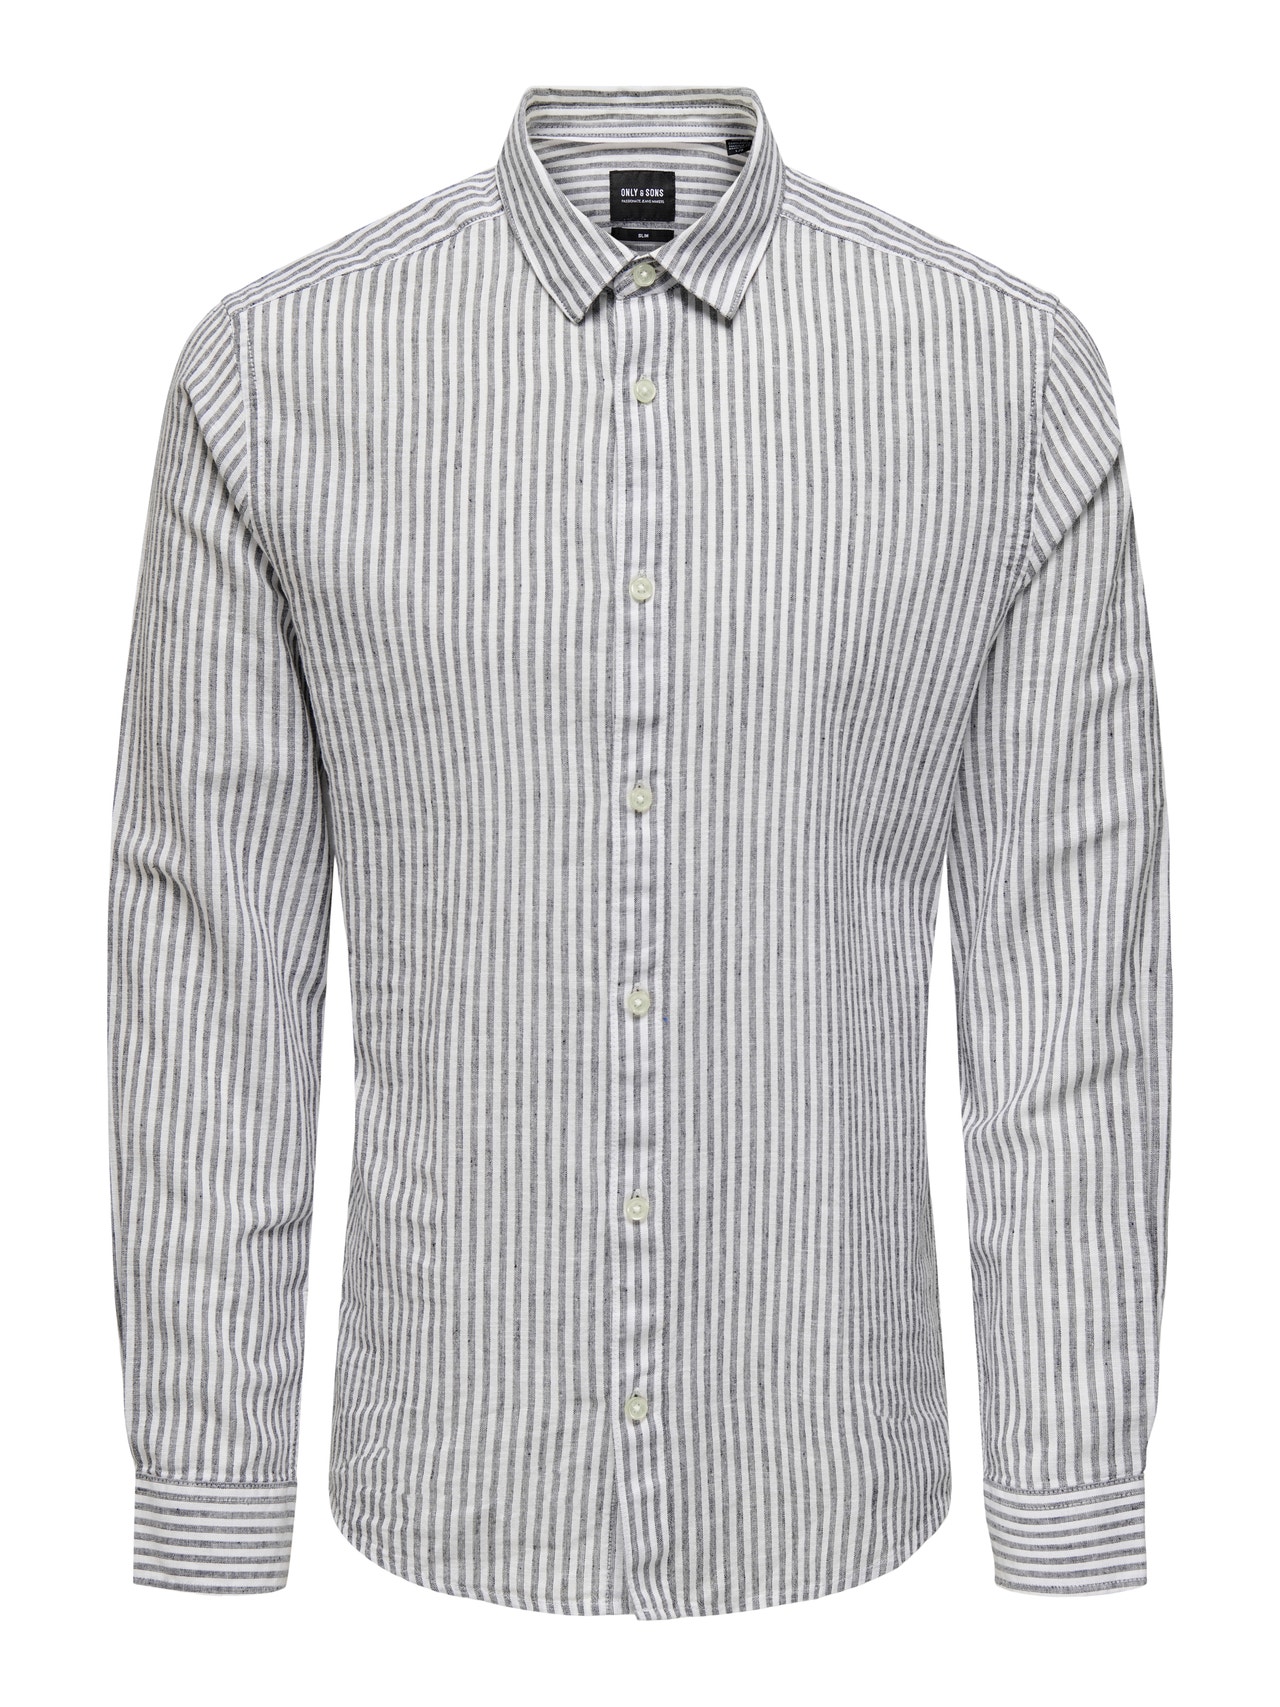 ONLY & SONS Shirt with long sleeves -Dark Navy - 22026601